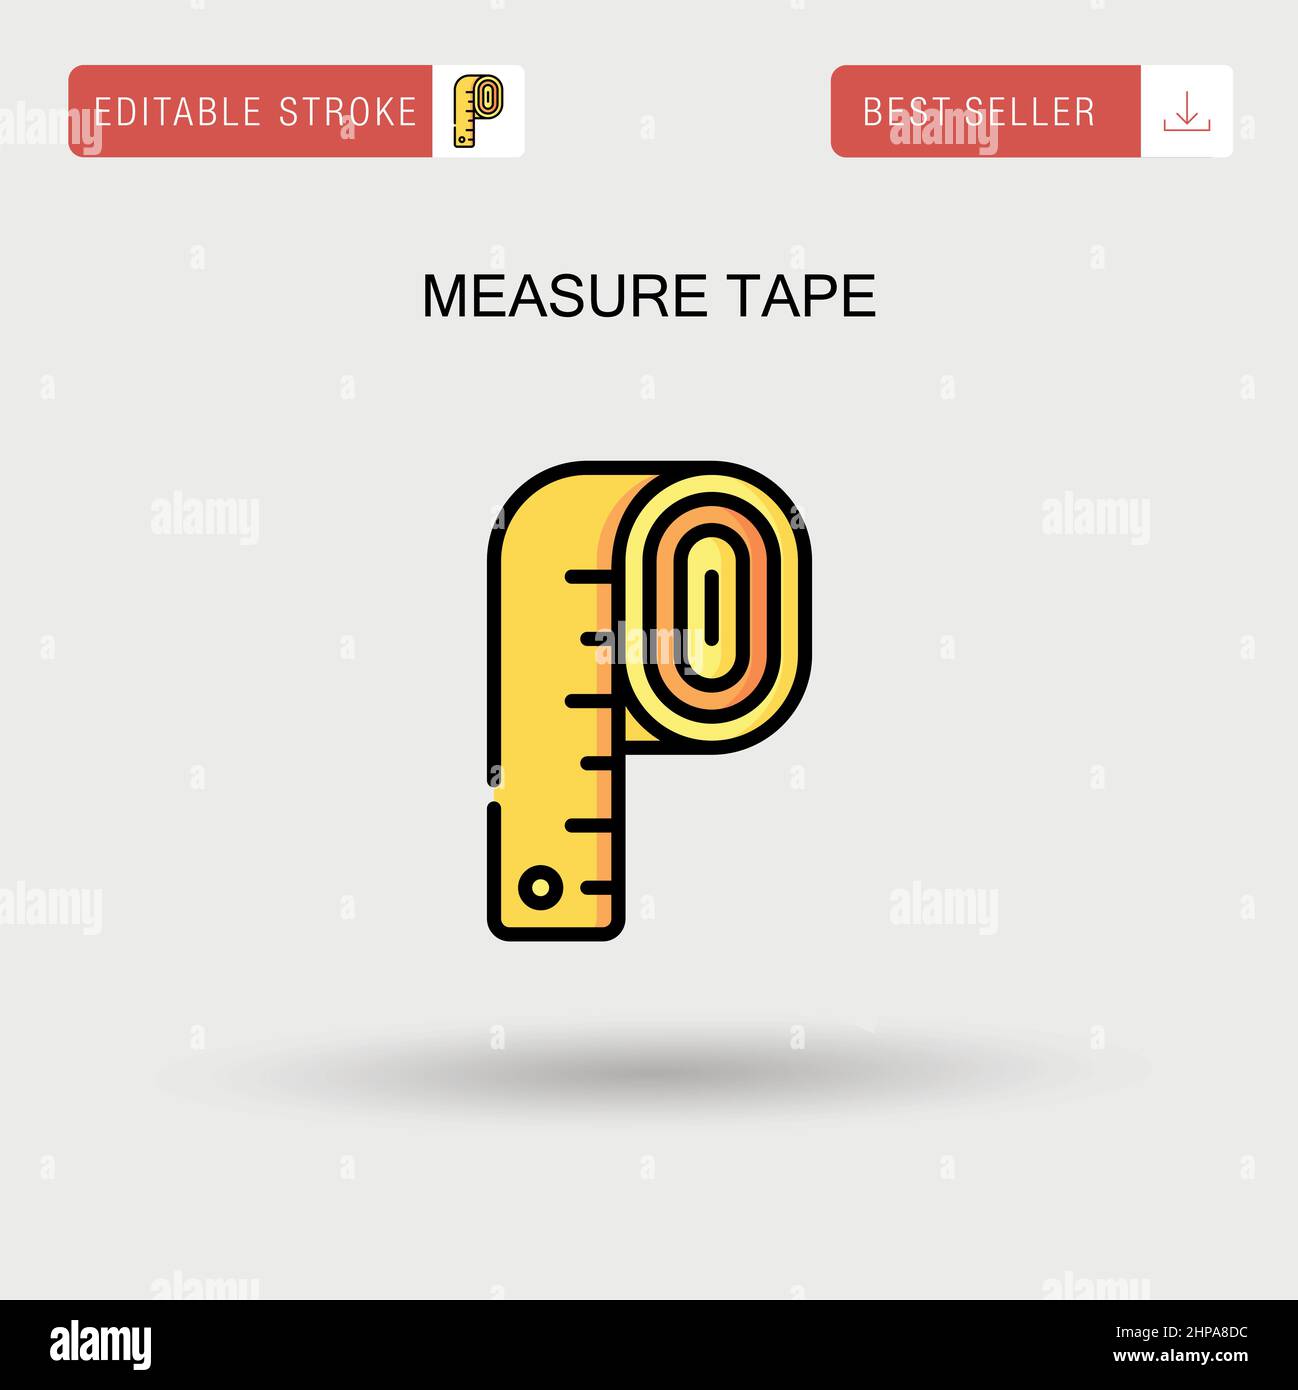 Measuring Tape With Fractions Photos, Download The BEST Free